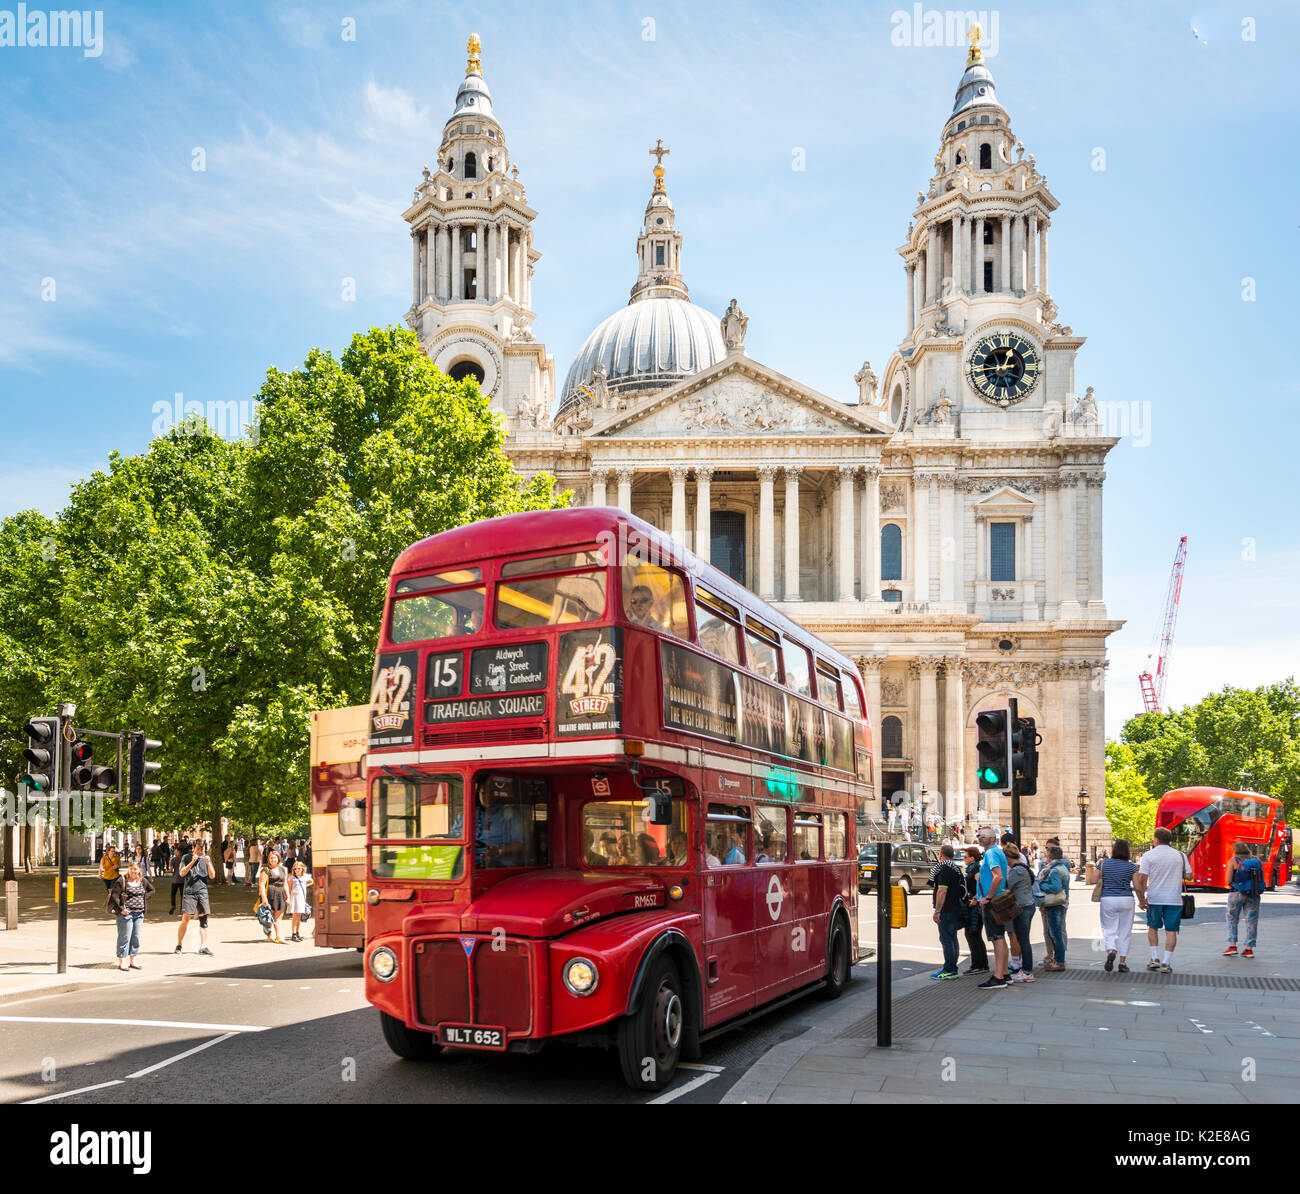 Red double deck bus, St. Paul's cathedral, London, England, United Kingdom Stock Photo